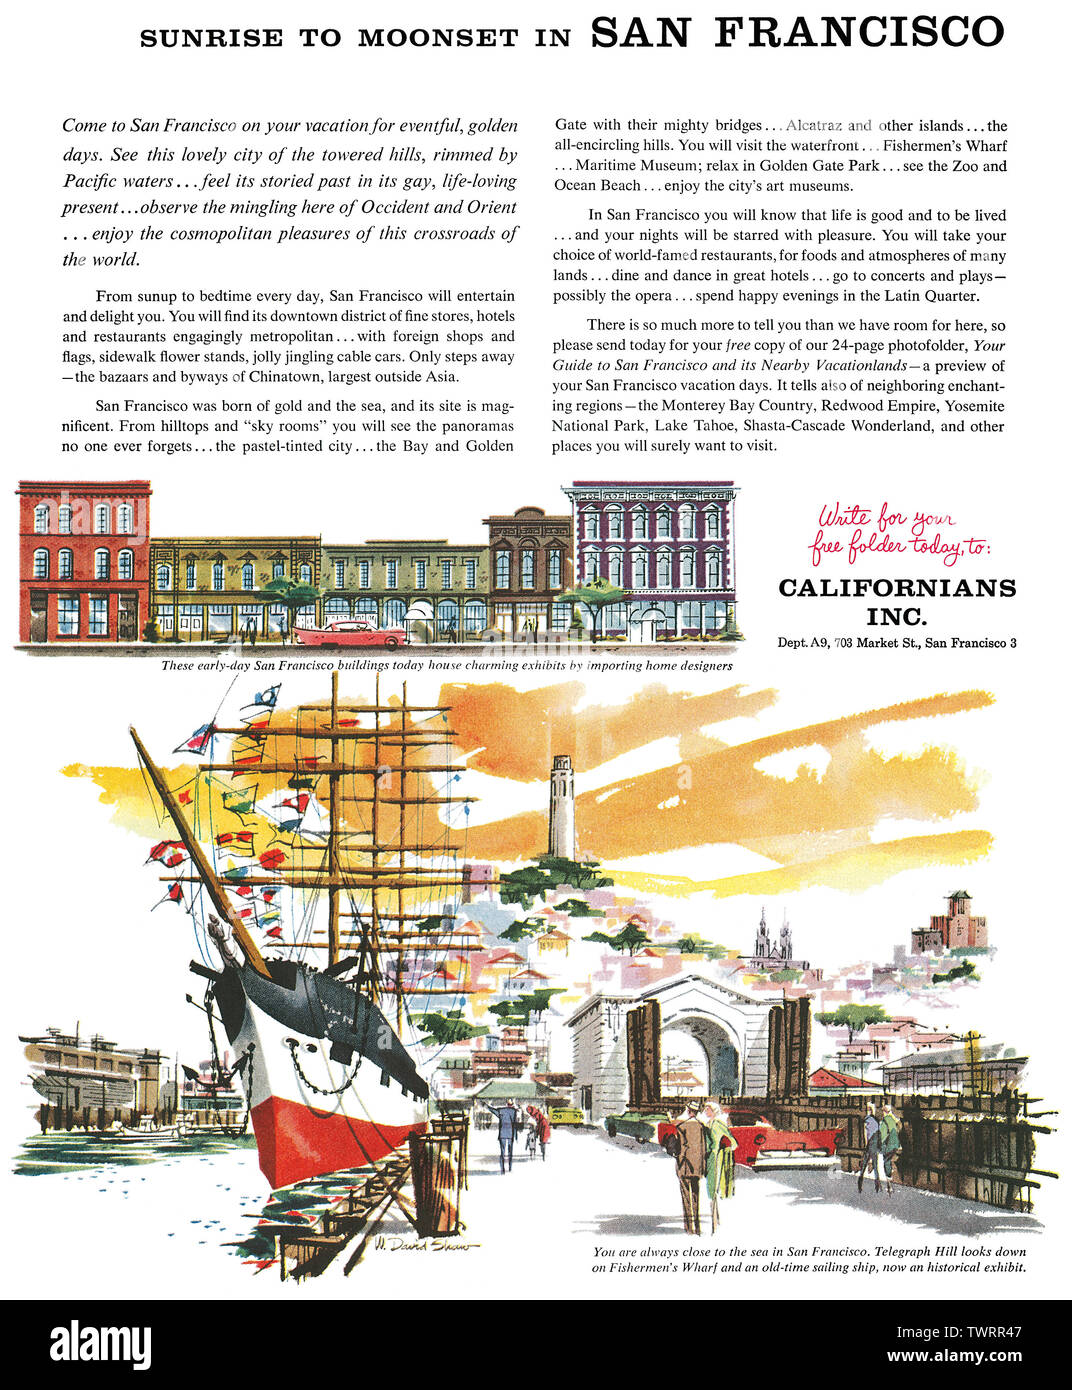 1958 U.S. advertisement promoting San Francisco as a vacation destination by Californians Inc. Stock Photo